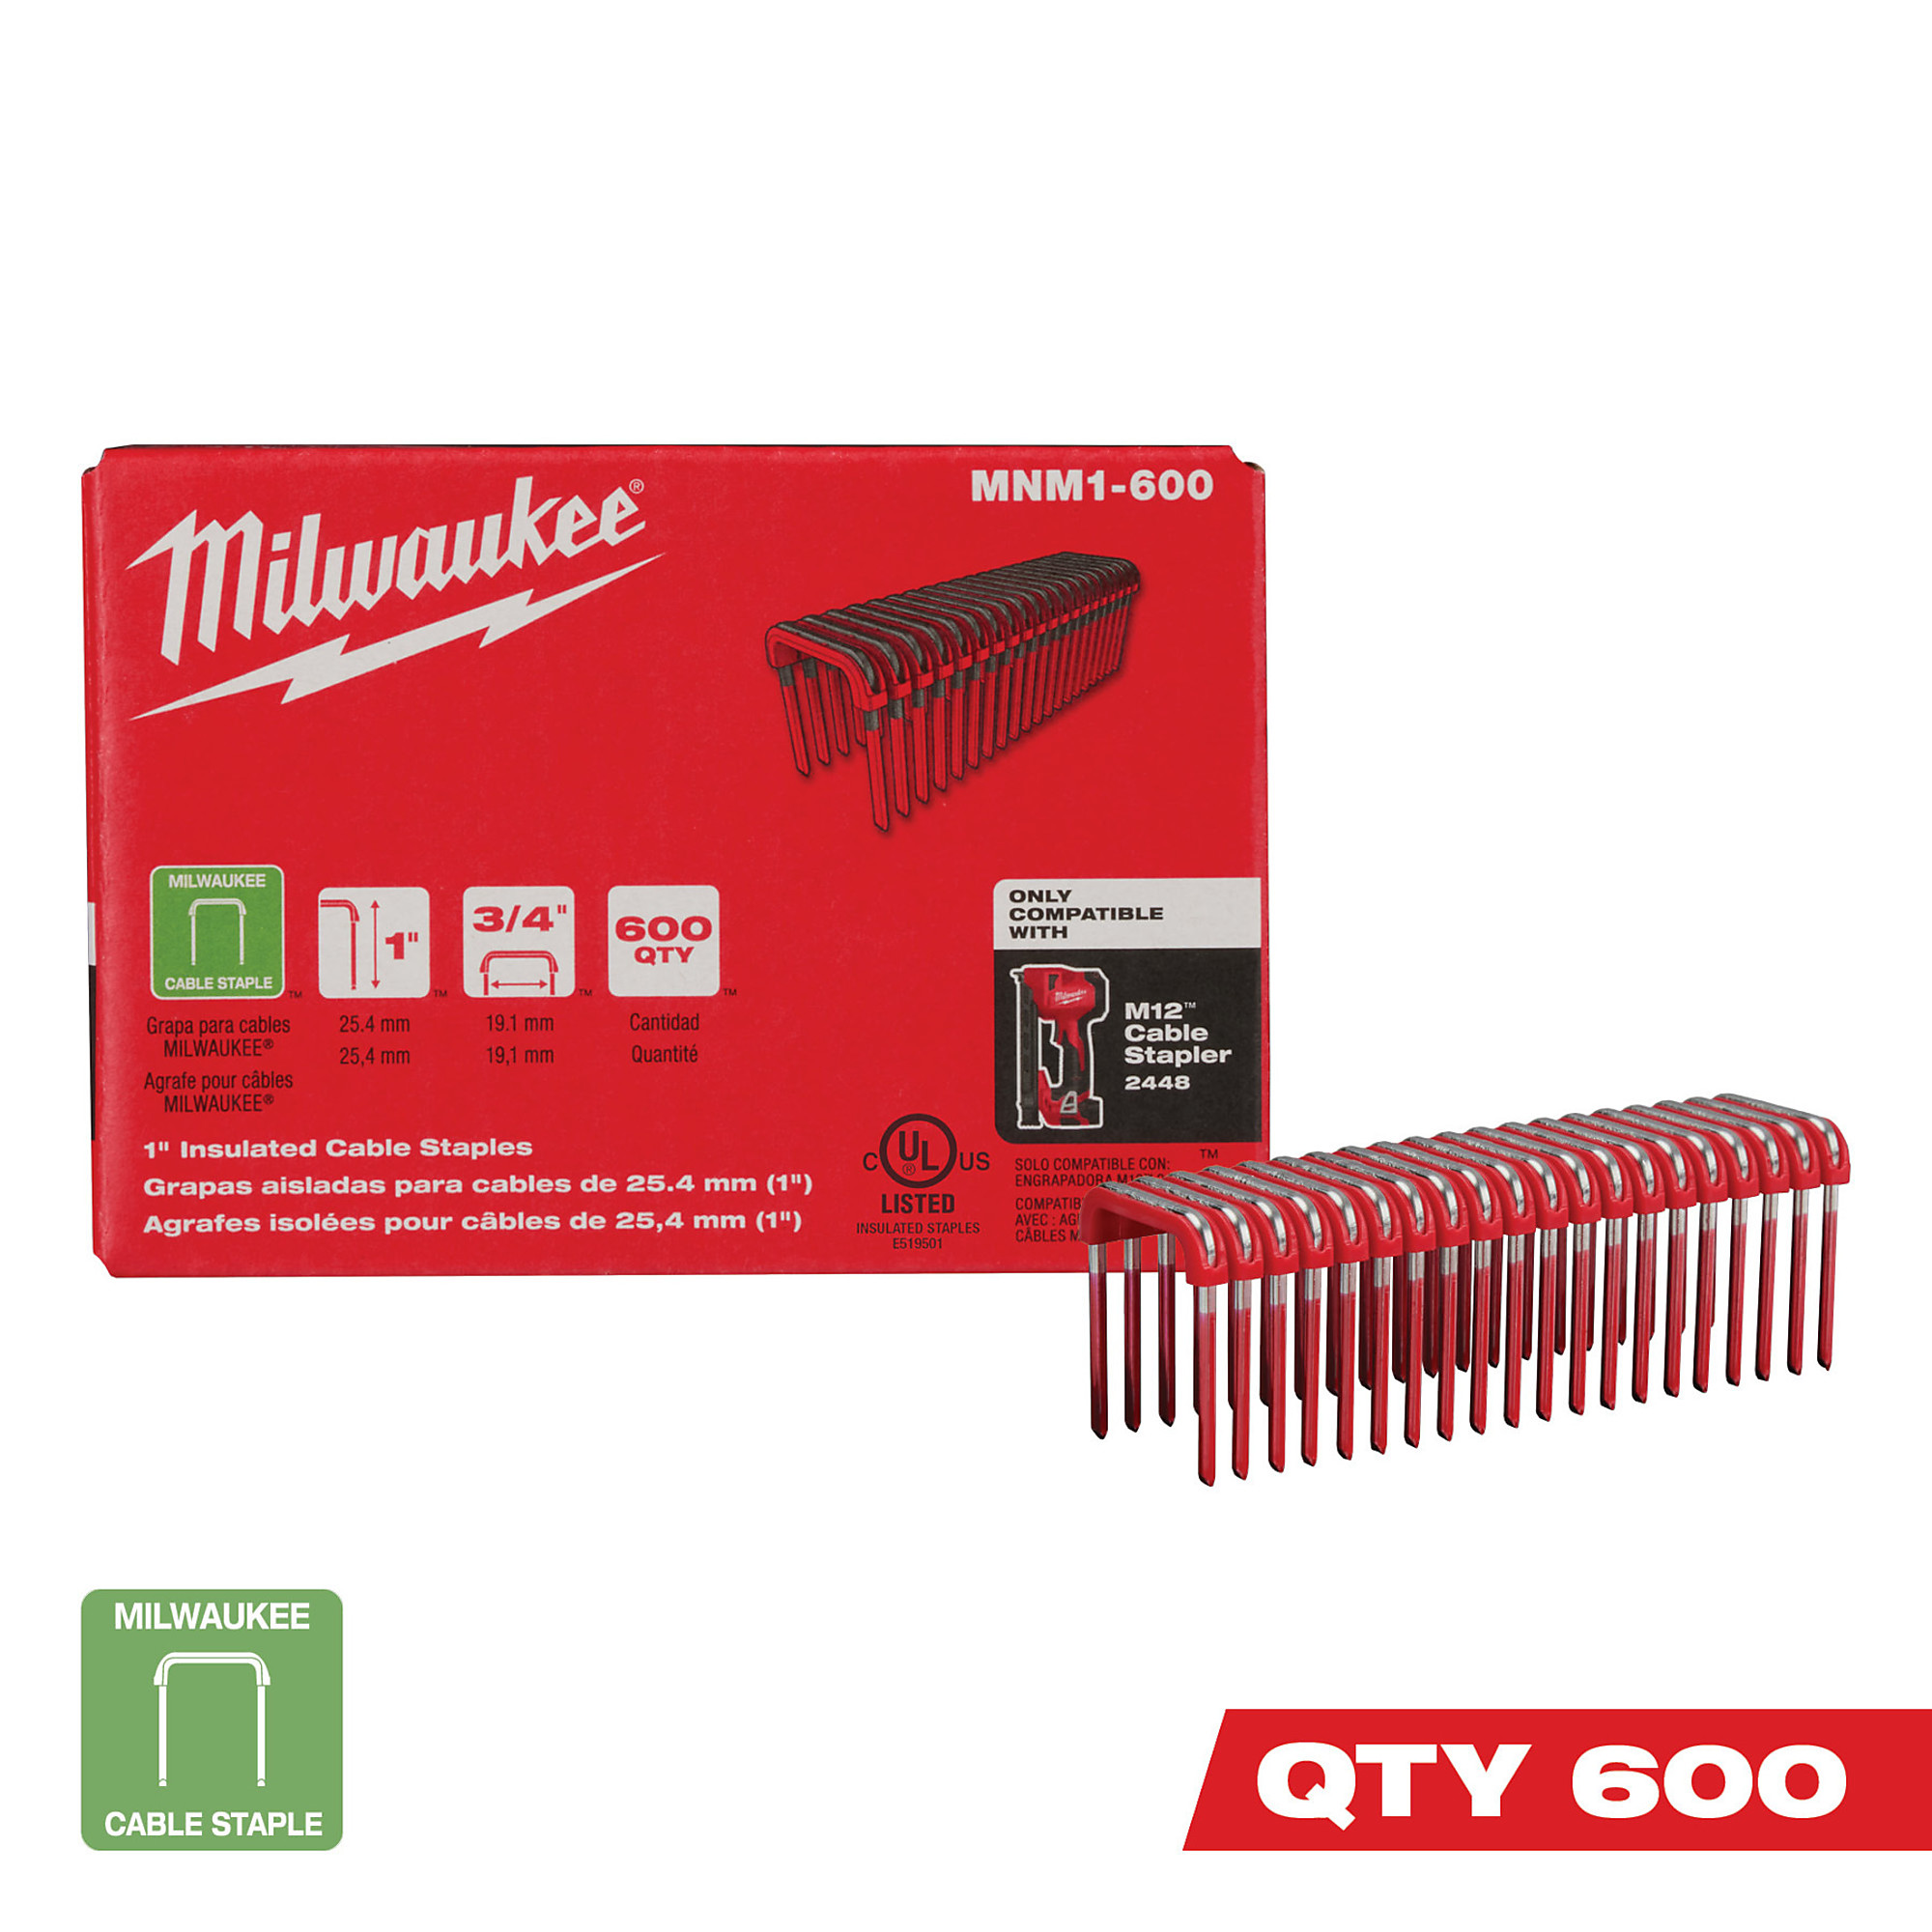 Milwaukee 1Inch Insulated Cable Staples, 1 Box of 600 Staples, Model MNM1-600